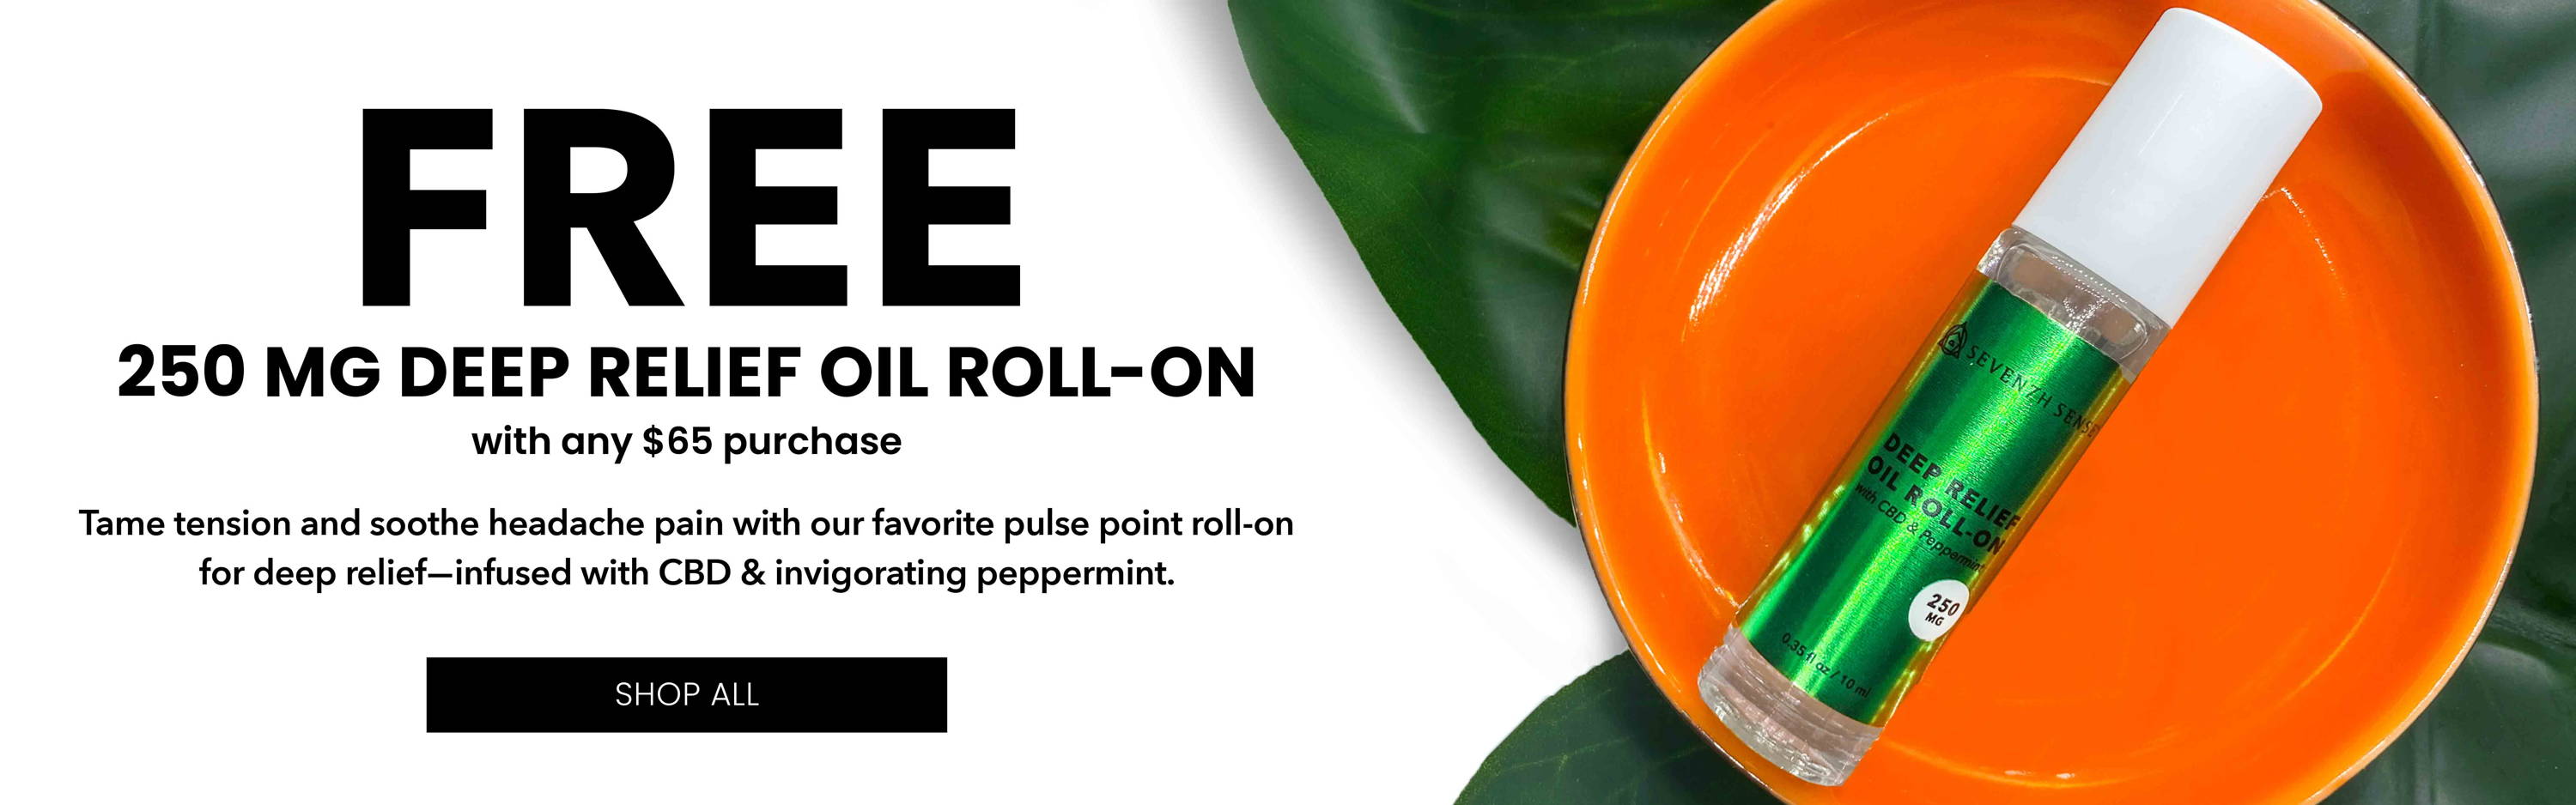 Free 250mg Deep Relief Oil Roll-on with any $65 purchase.